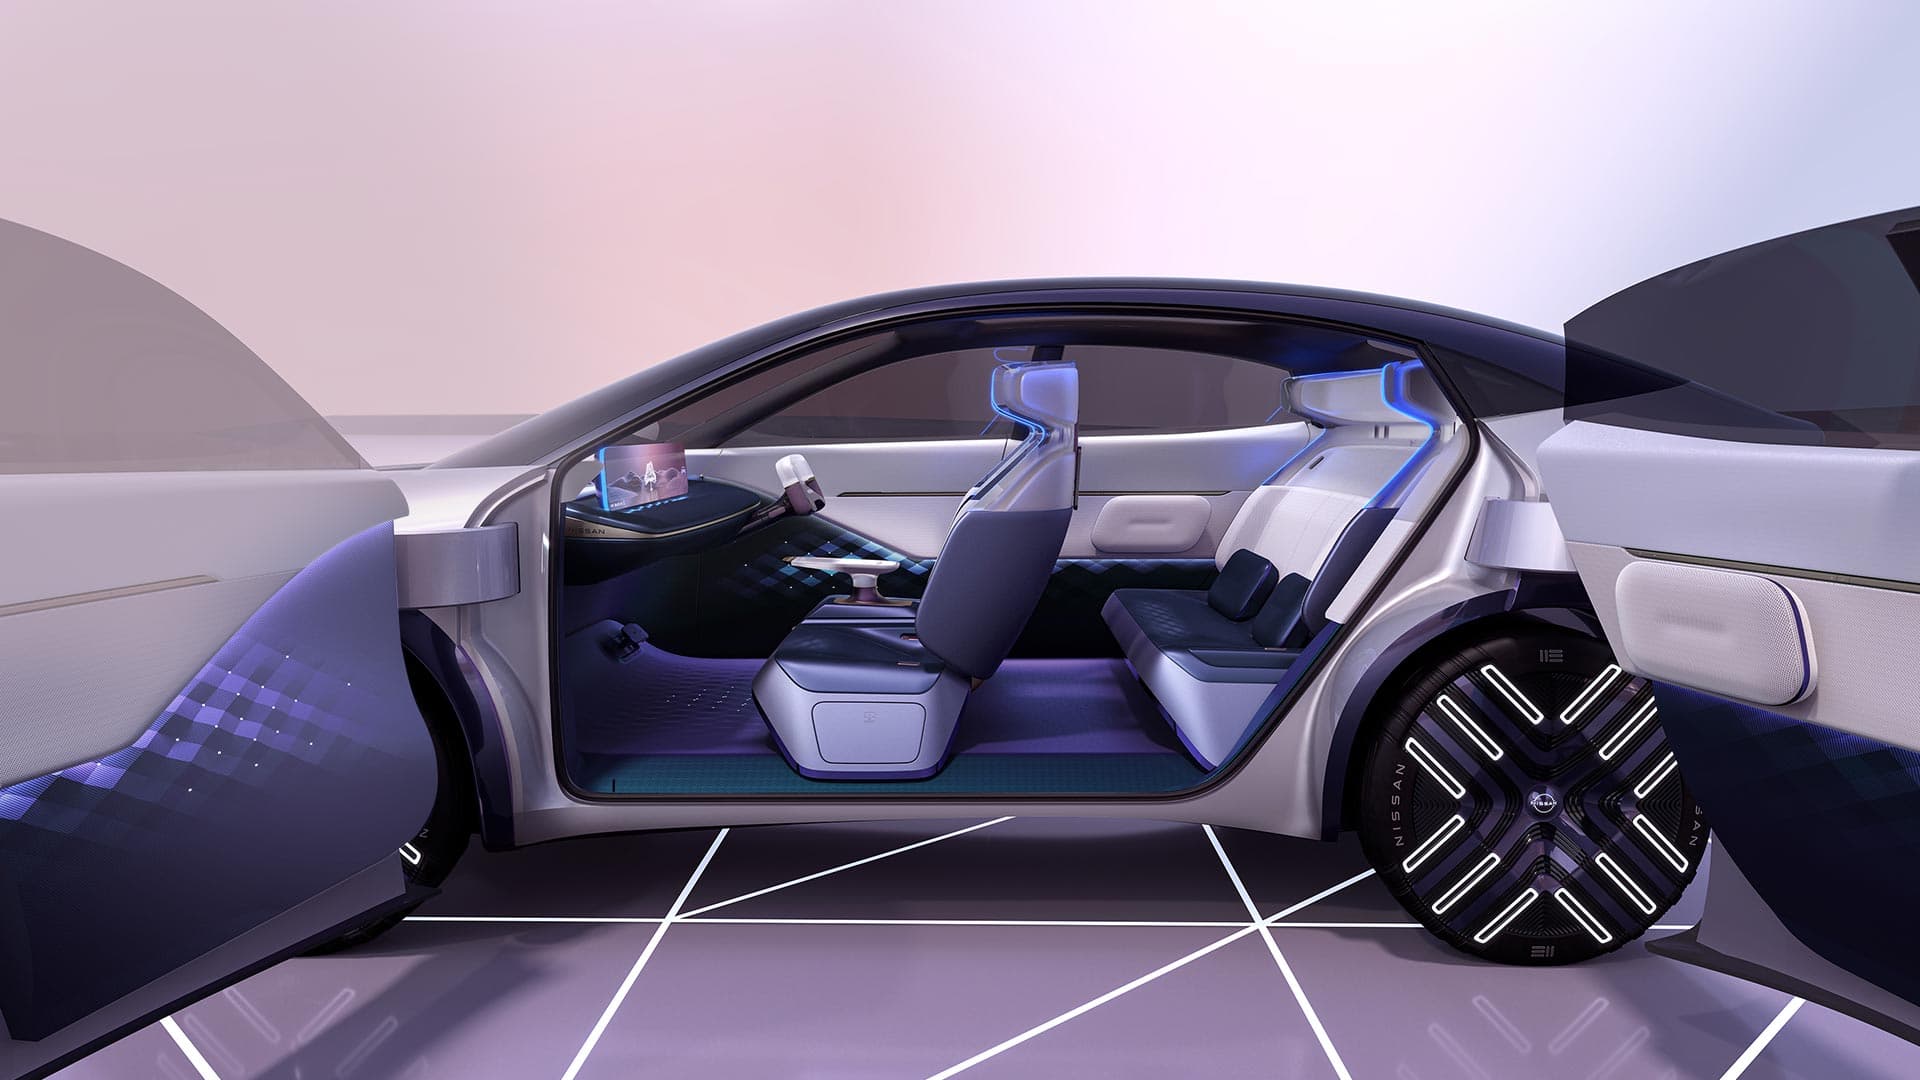 NISSAN CHILL-OUT Concept Car Image